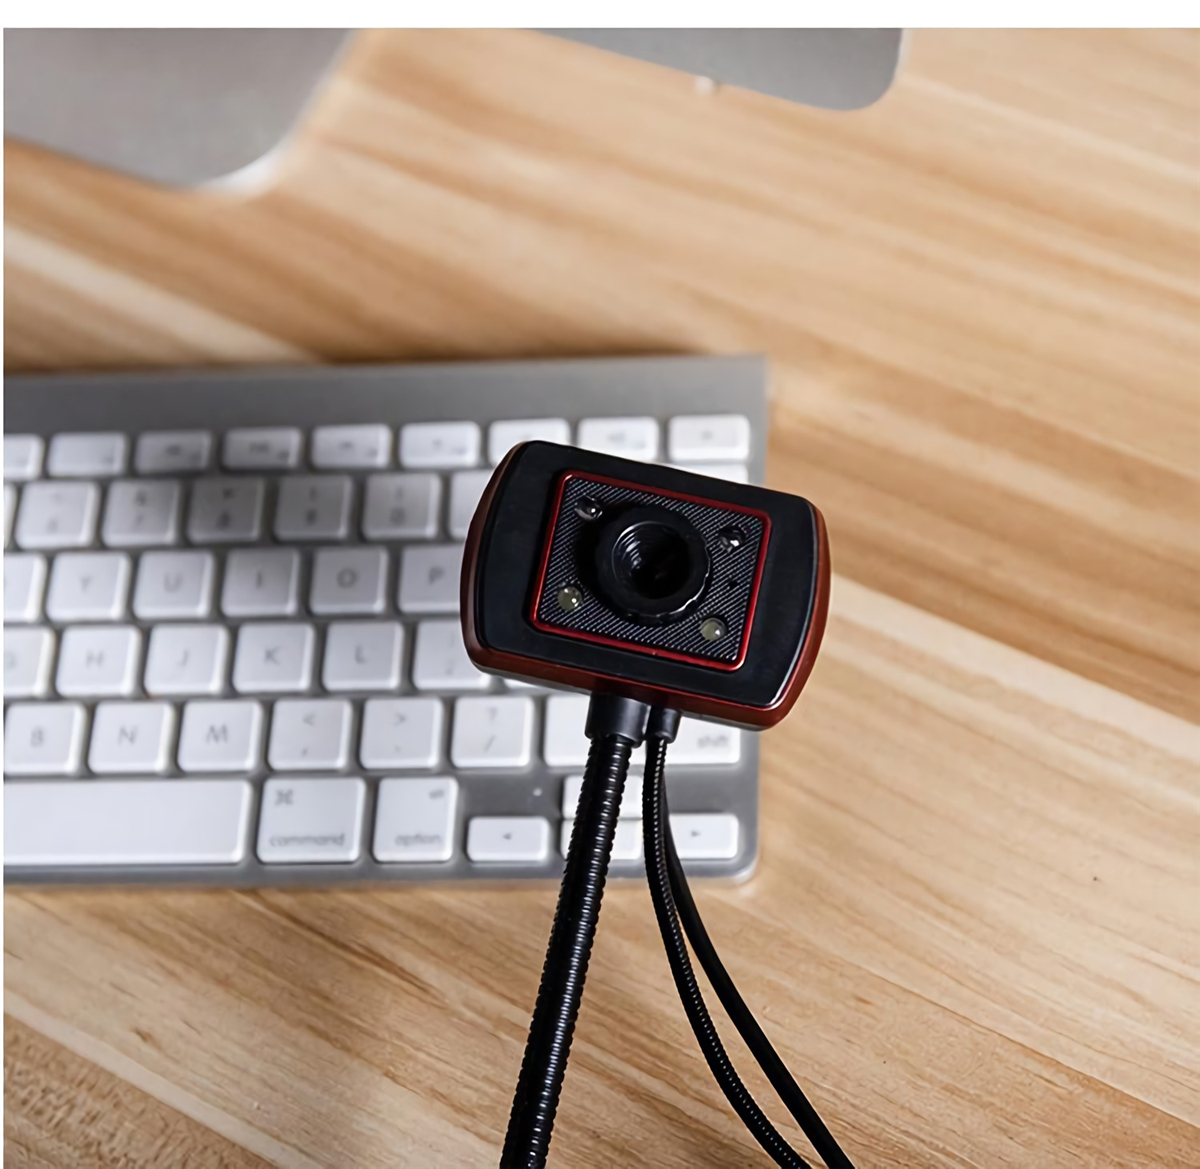 S620-480P-HD-Webcam-CMOS-USB-20-Wired-Computer-Web-Camera-Built-in-Microphone-Camera-for-Desktop-Com-1891978-6